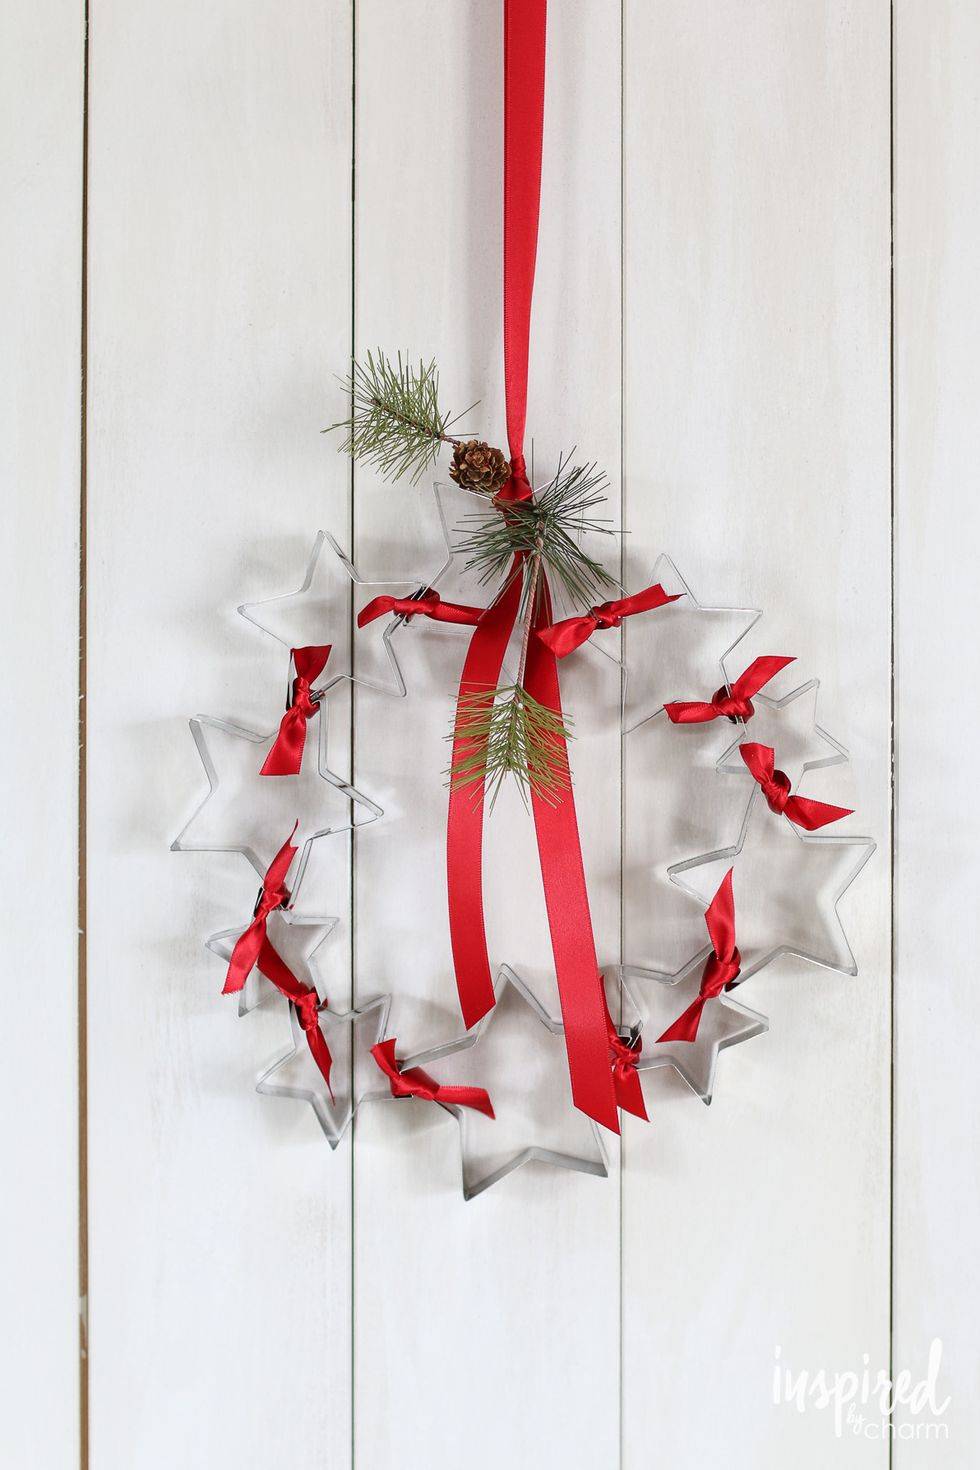 stainless steel cookie cutter star wreath with red ribbon